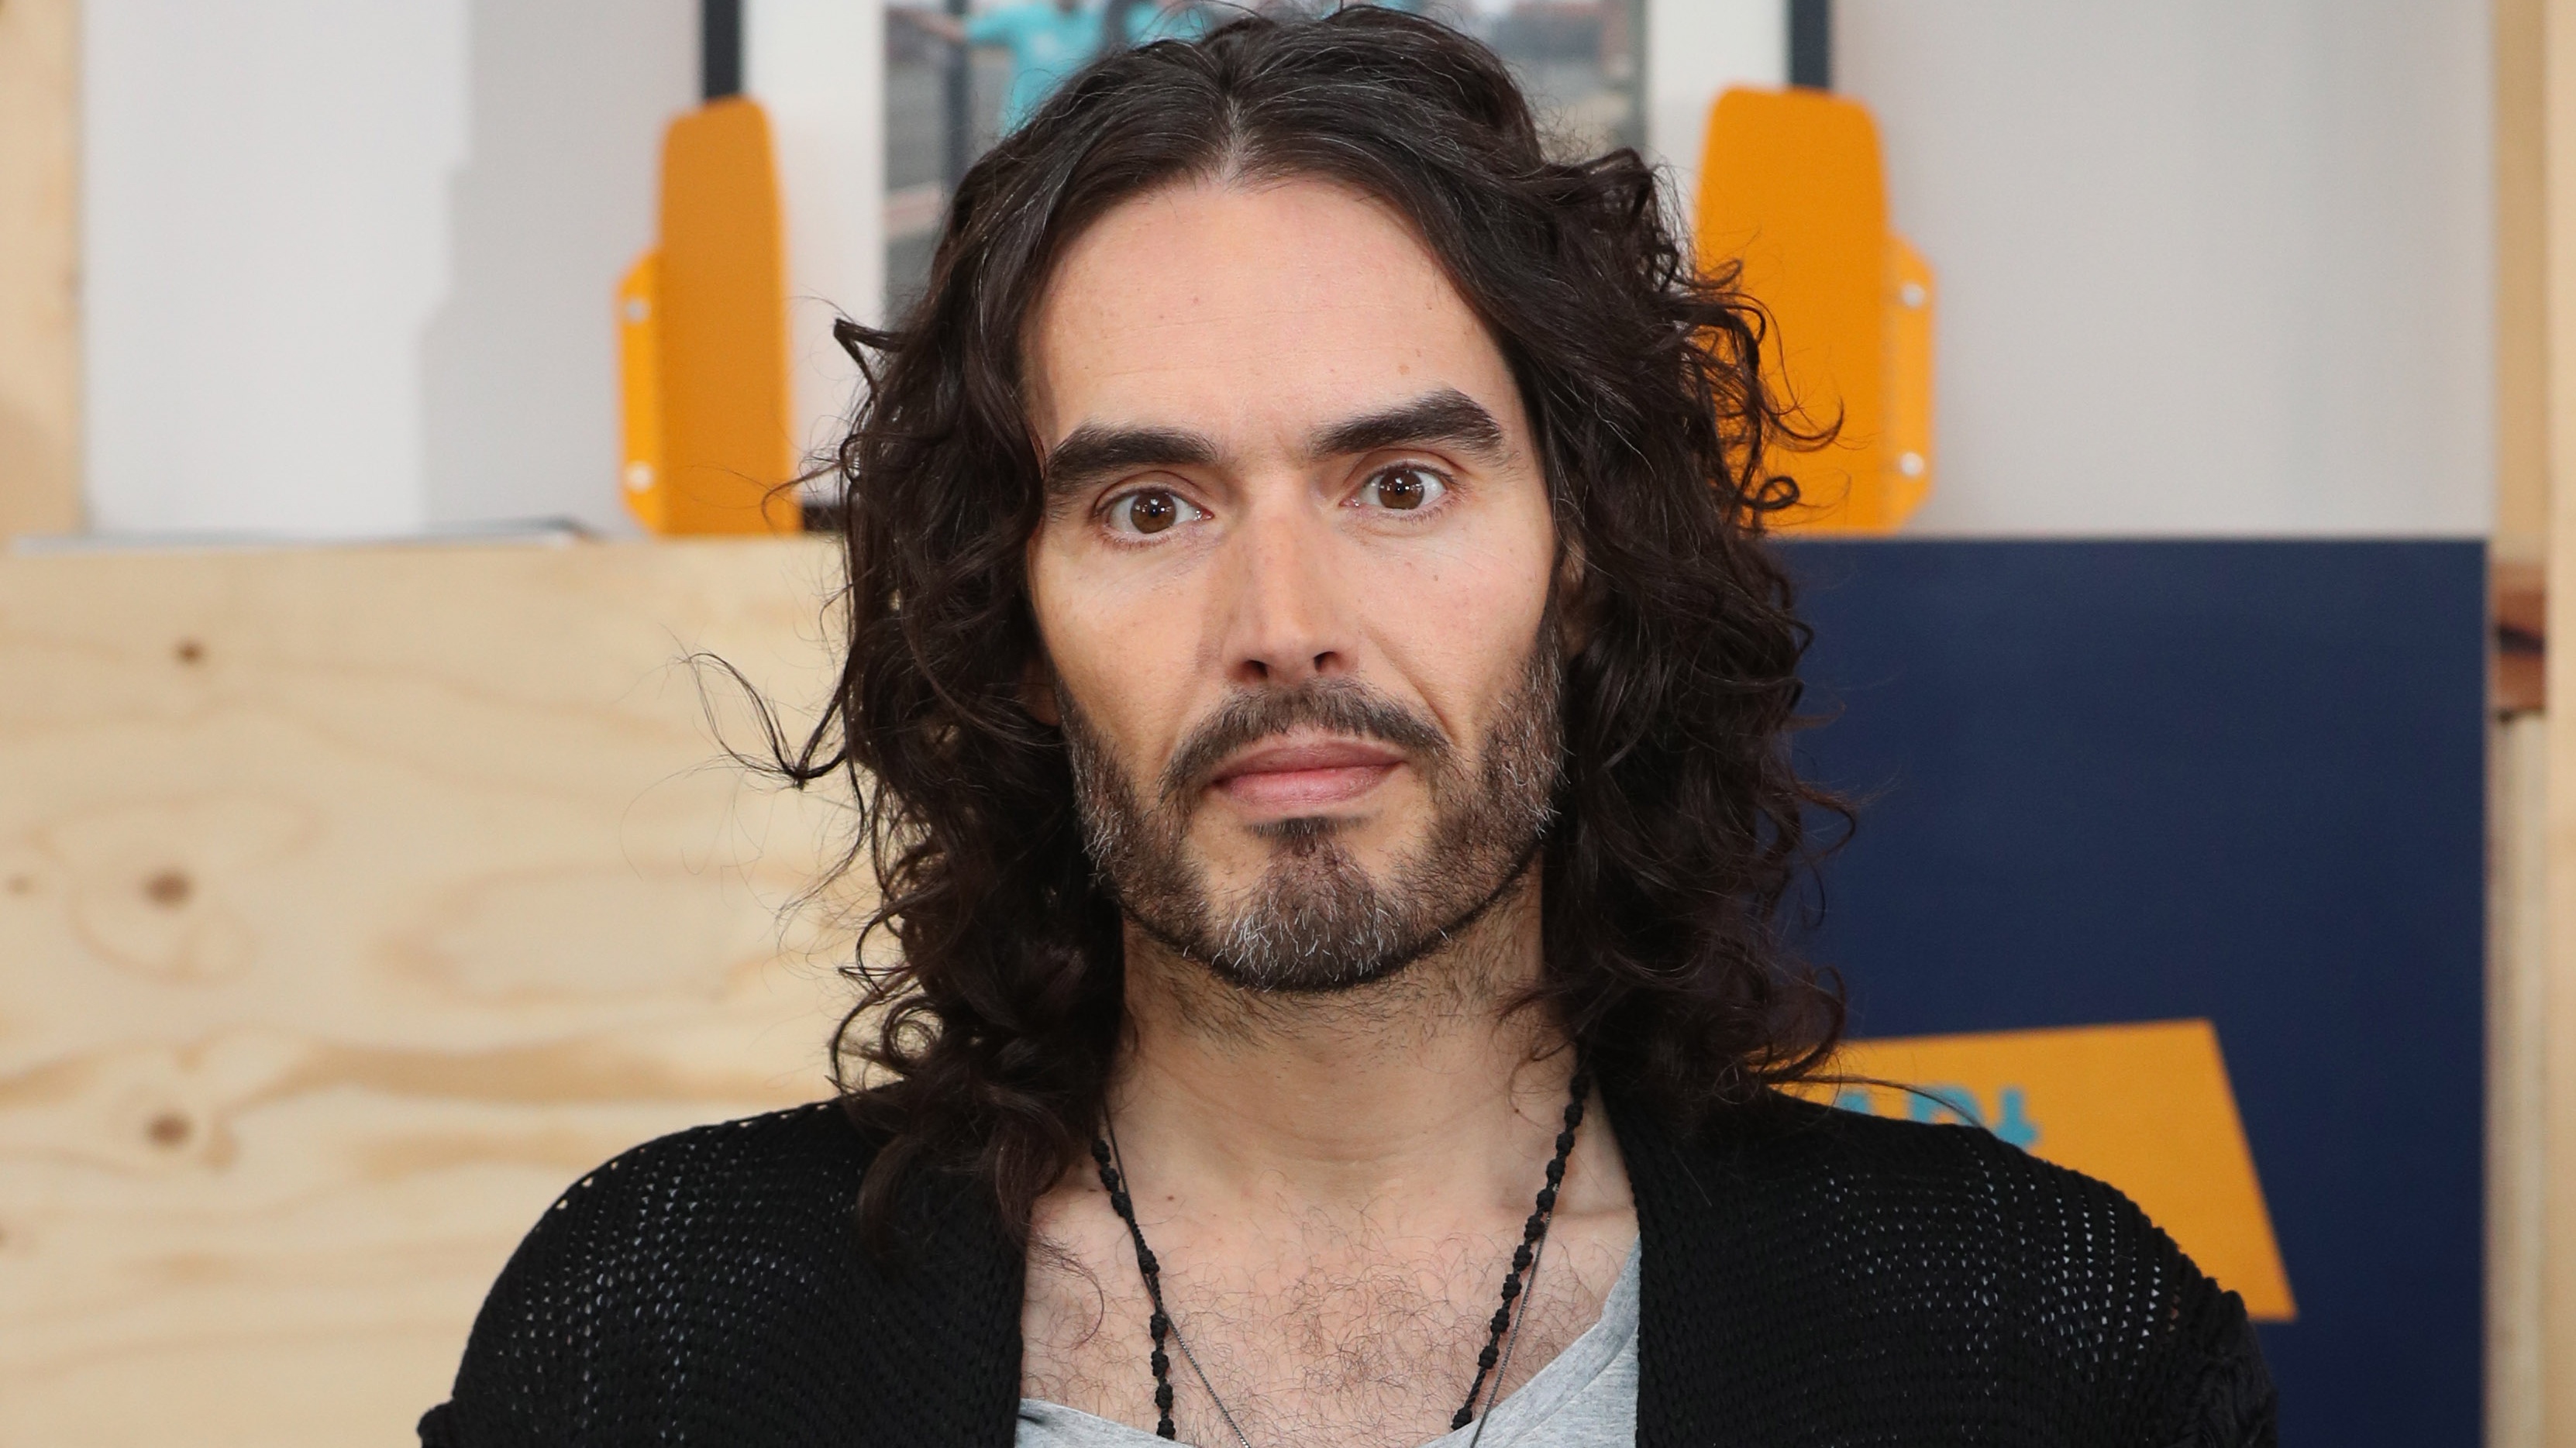 Russell Brand attending a launch event for charity RAPt's new employment services for addicts and ex-offenders at the London Recovery Hub.